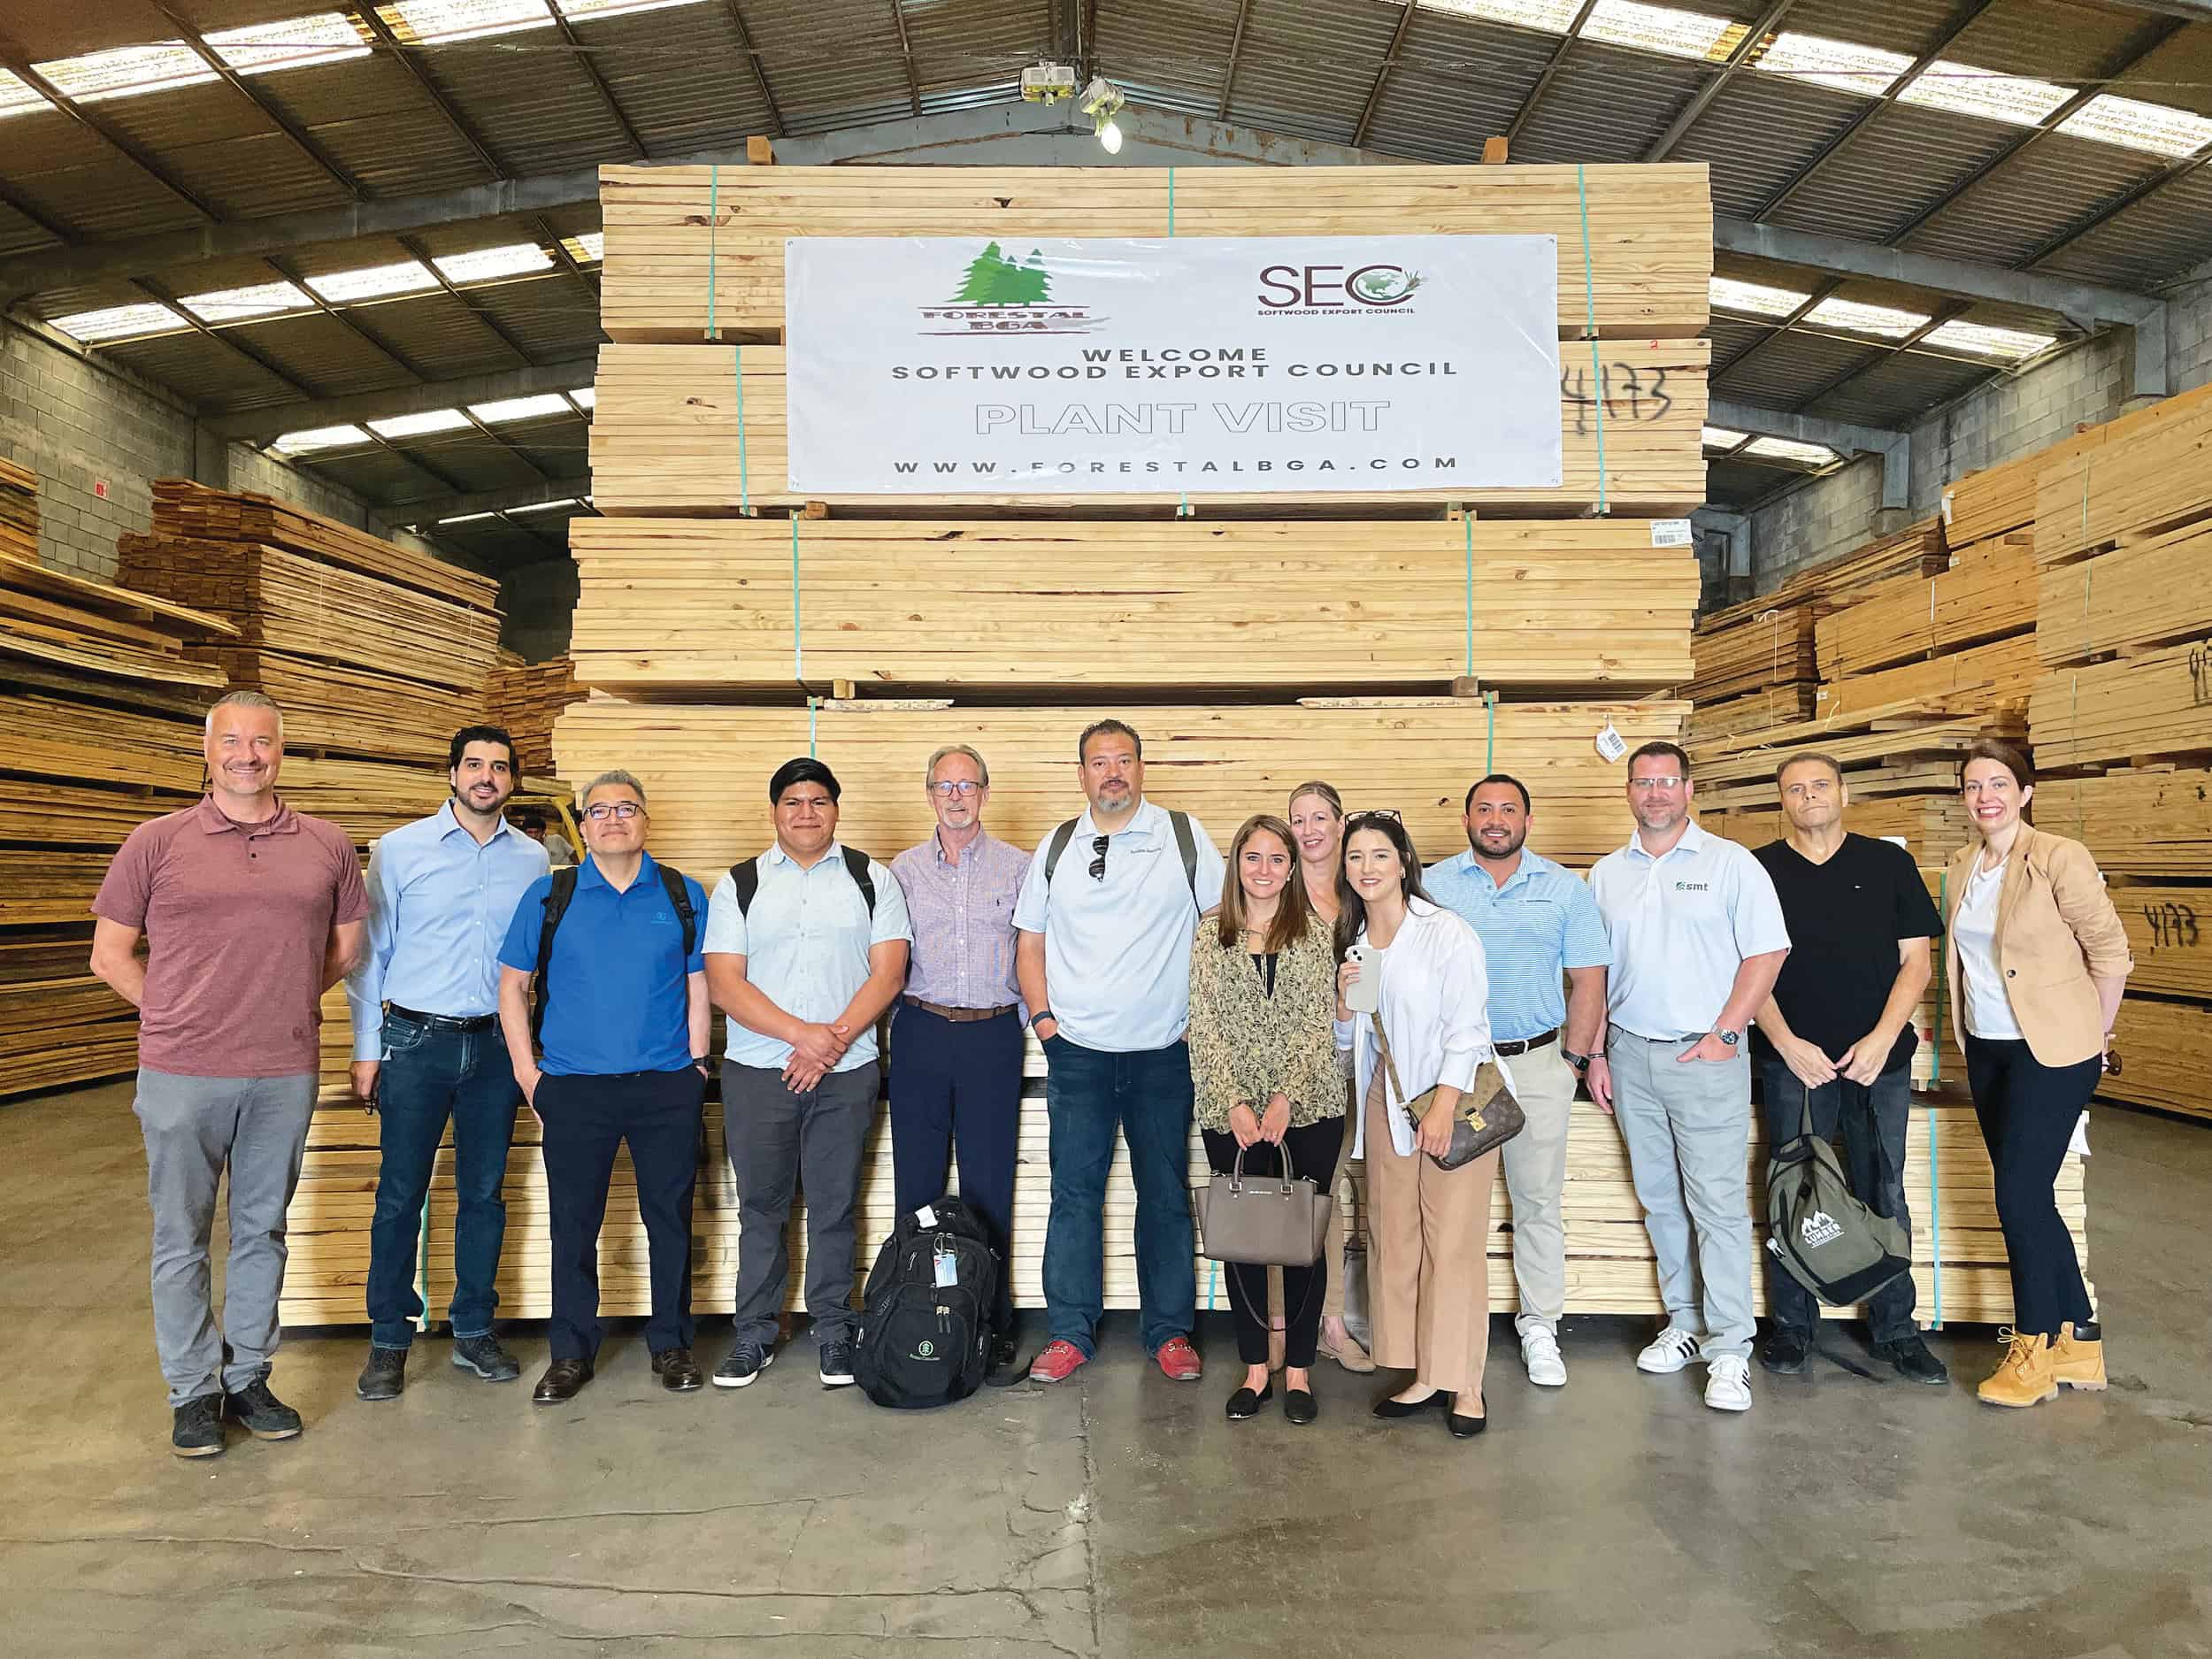 Softwood Export Council Trade Missions Generate International Sales For U.S. Suppliers 2